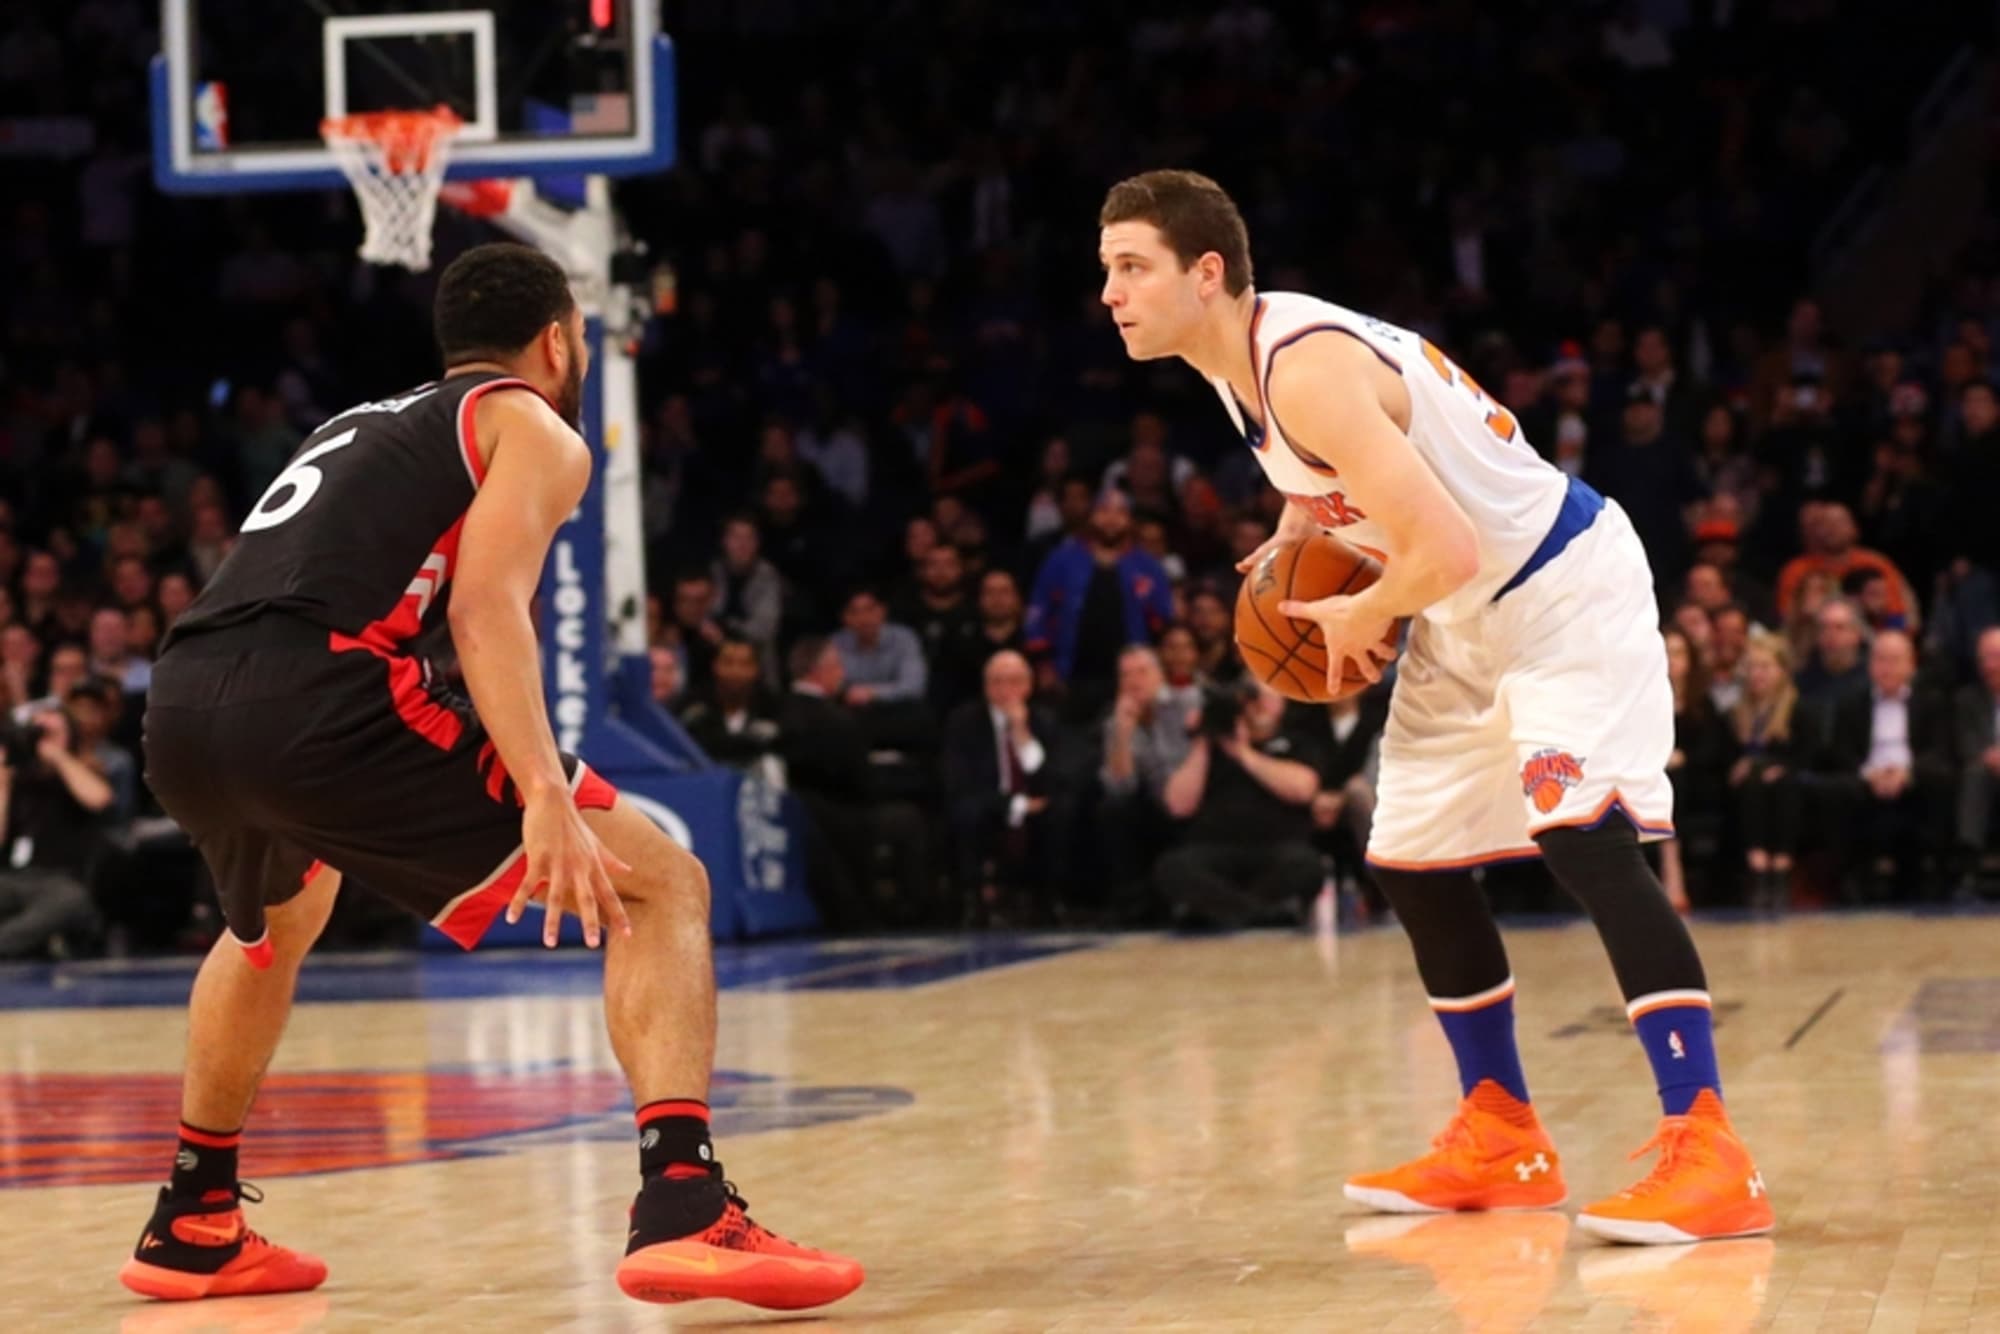 Jimmer Fredette's unlikely path to becoming a star